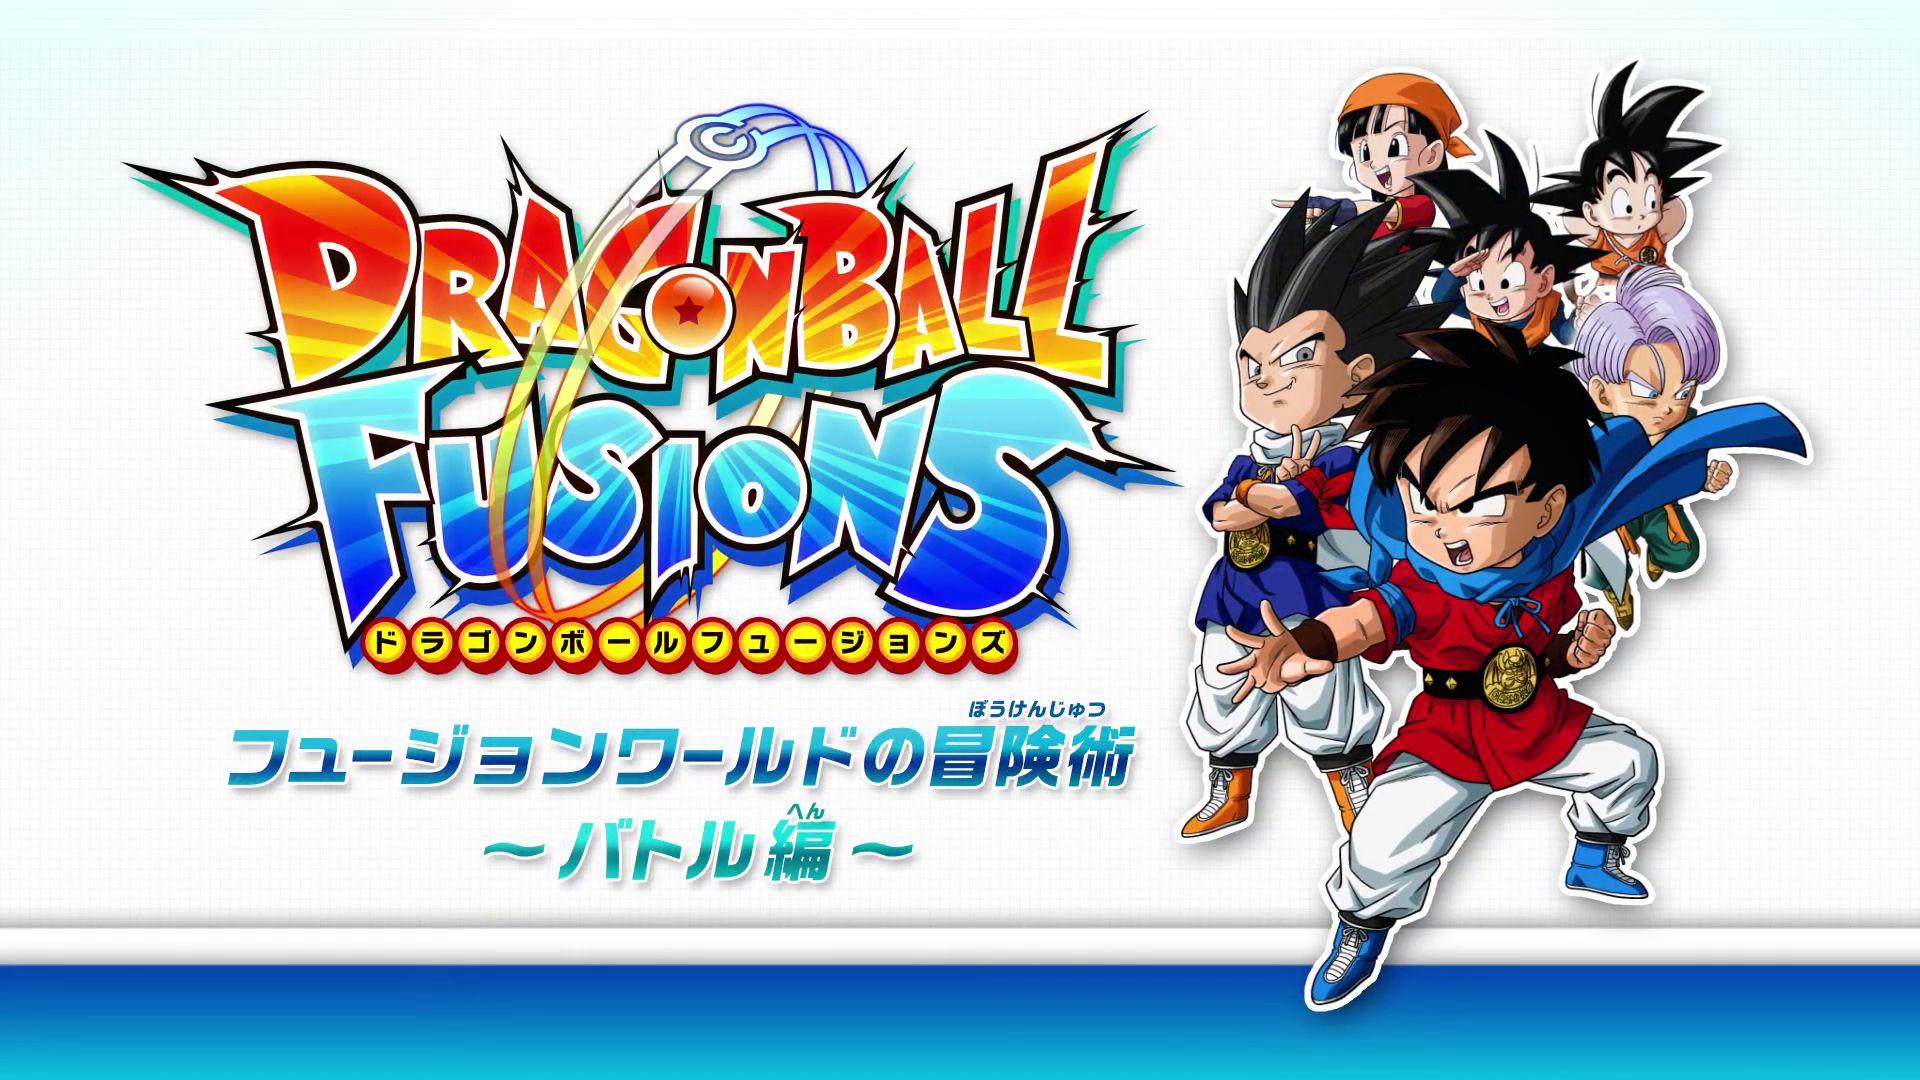 All Games Delta: Dragon Ball Fusions 'Battle' Gameplay Trailer